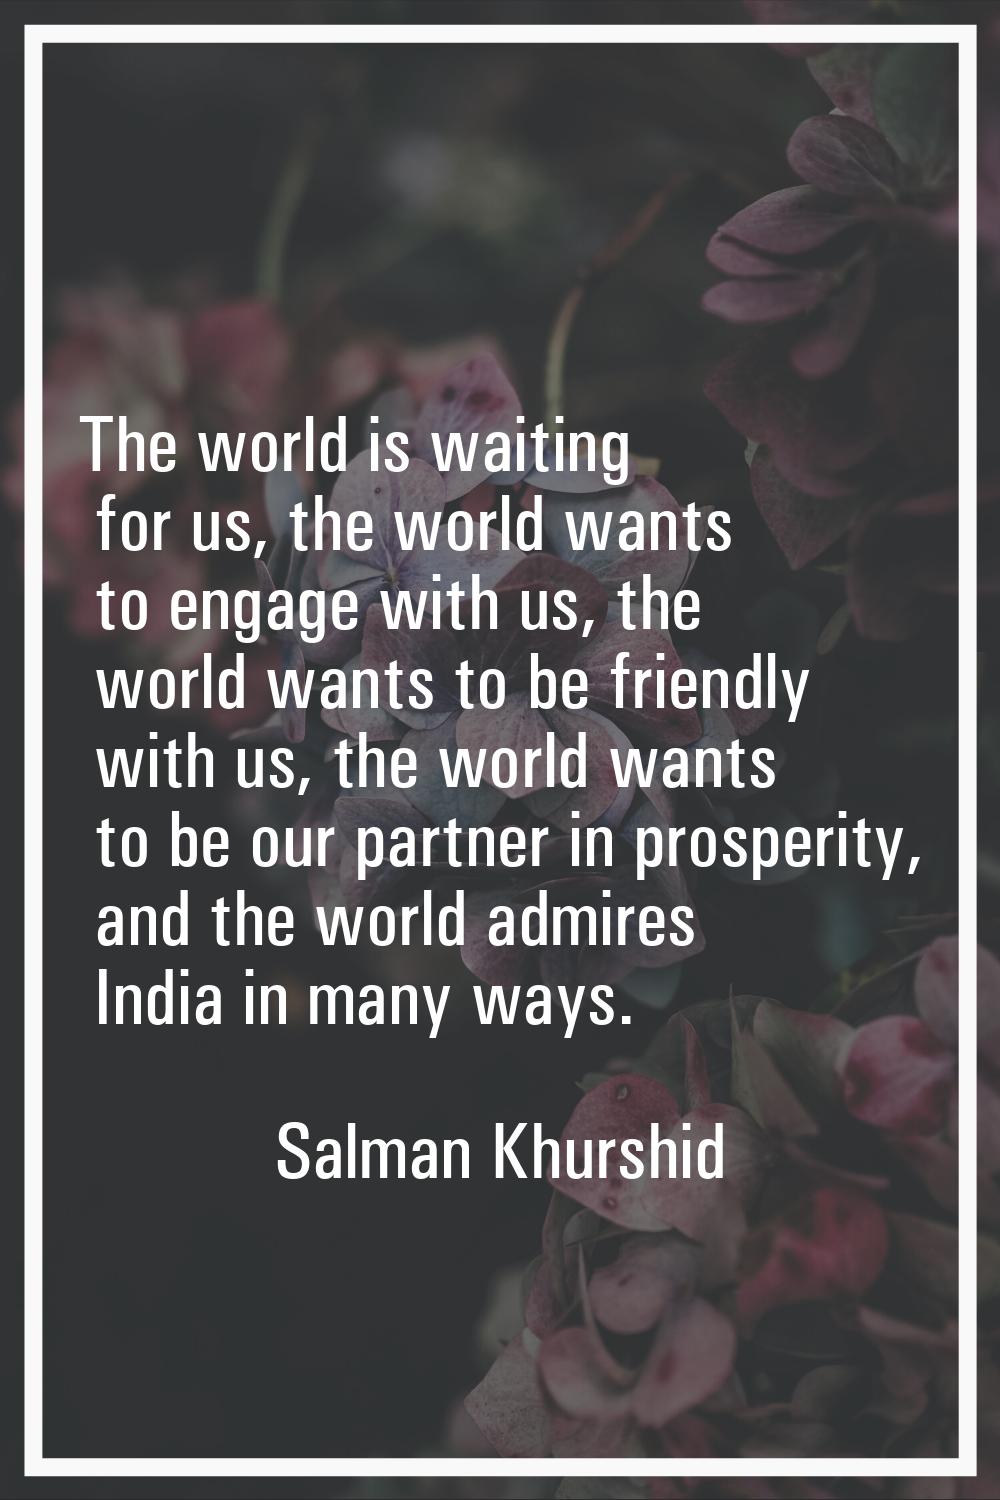 The world is waiting for us, the world wants to engage with us, the world wants to be friendly with